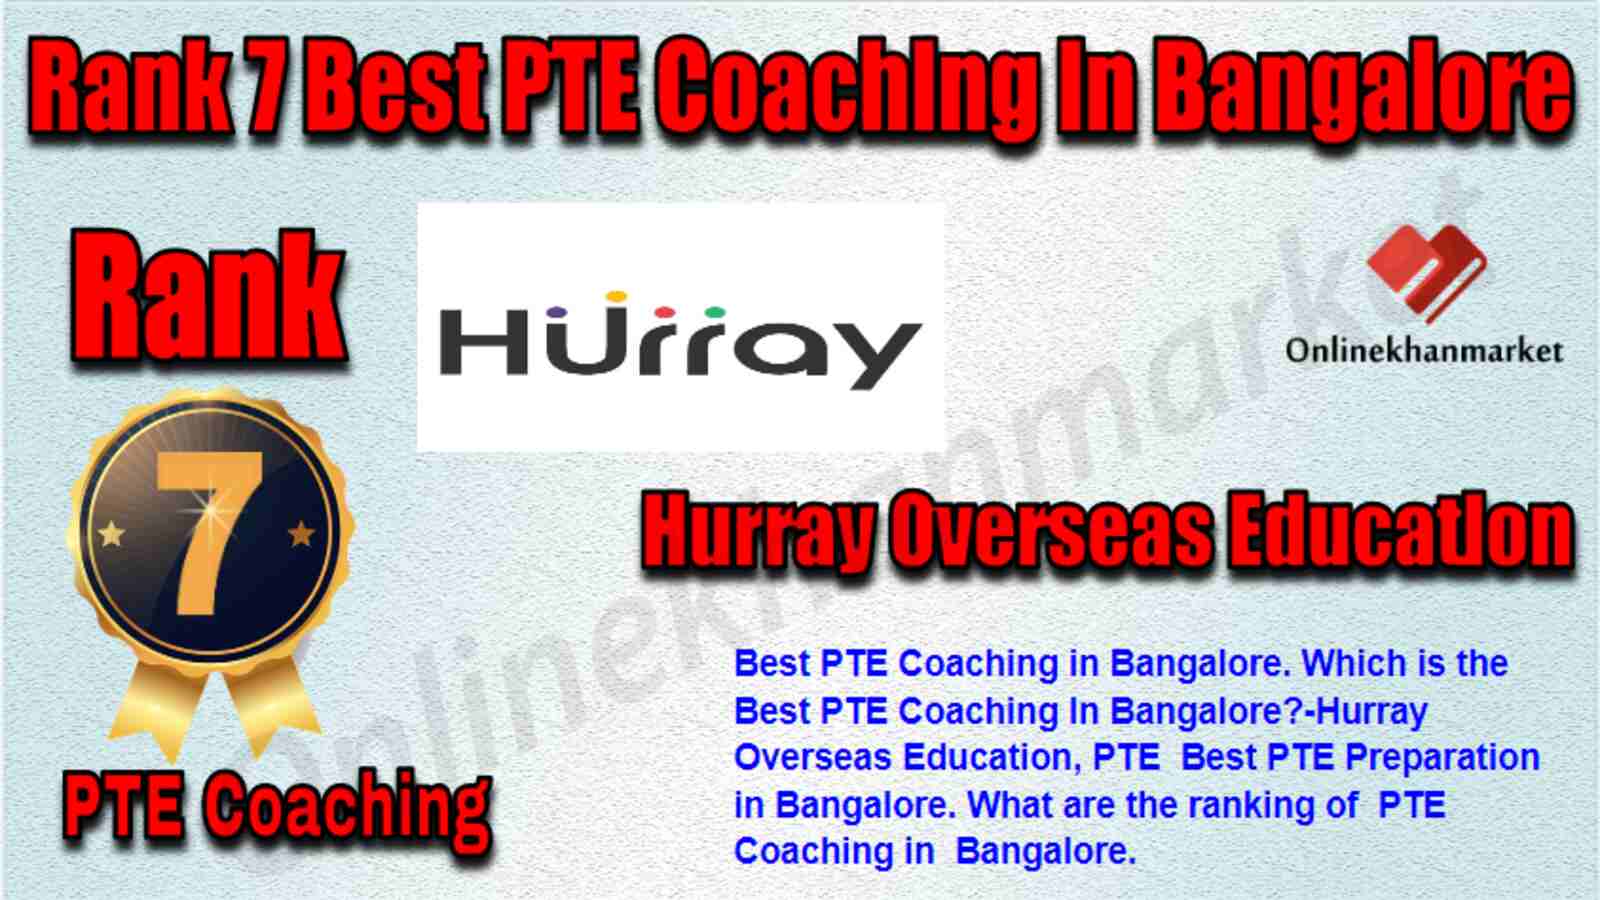 Rank 7 Best PTE Coaching in Bangalore